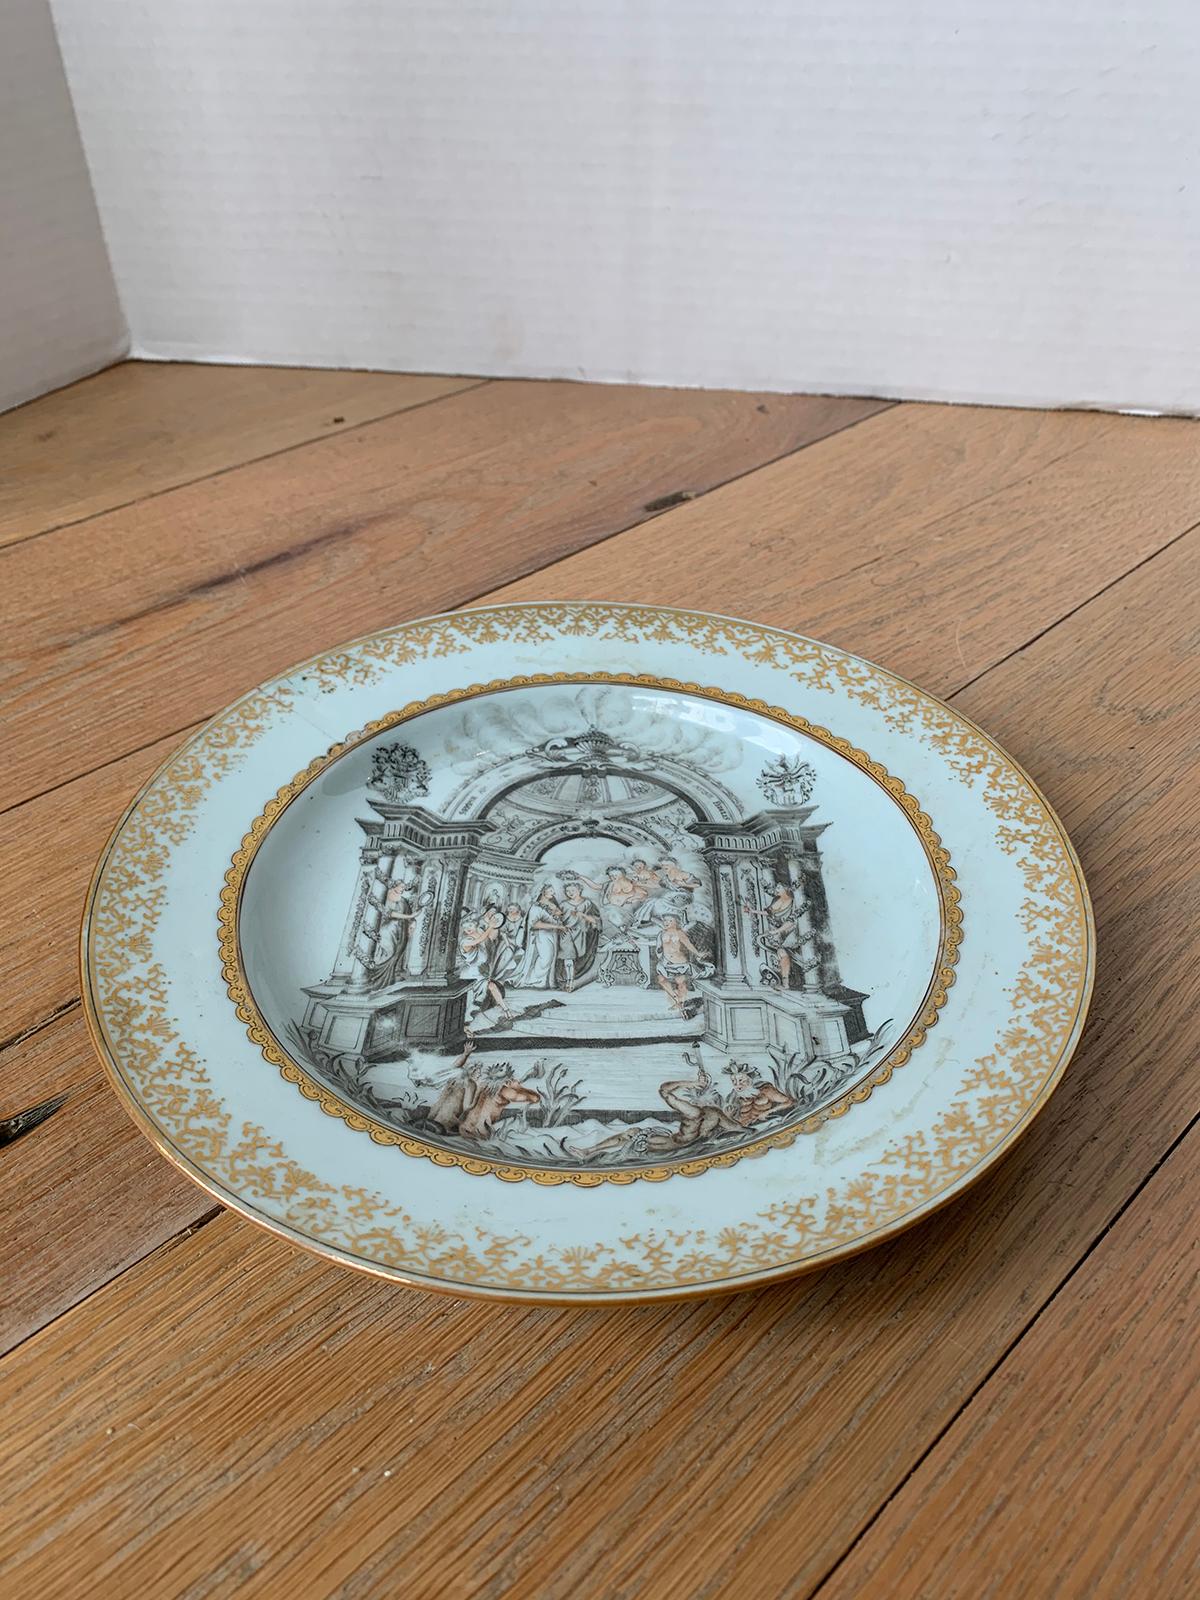 18th Century English Porcelain Marriage Plate with Two Dordrecht Family Crests 1